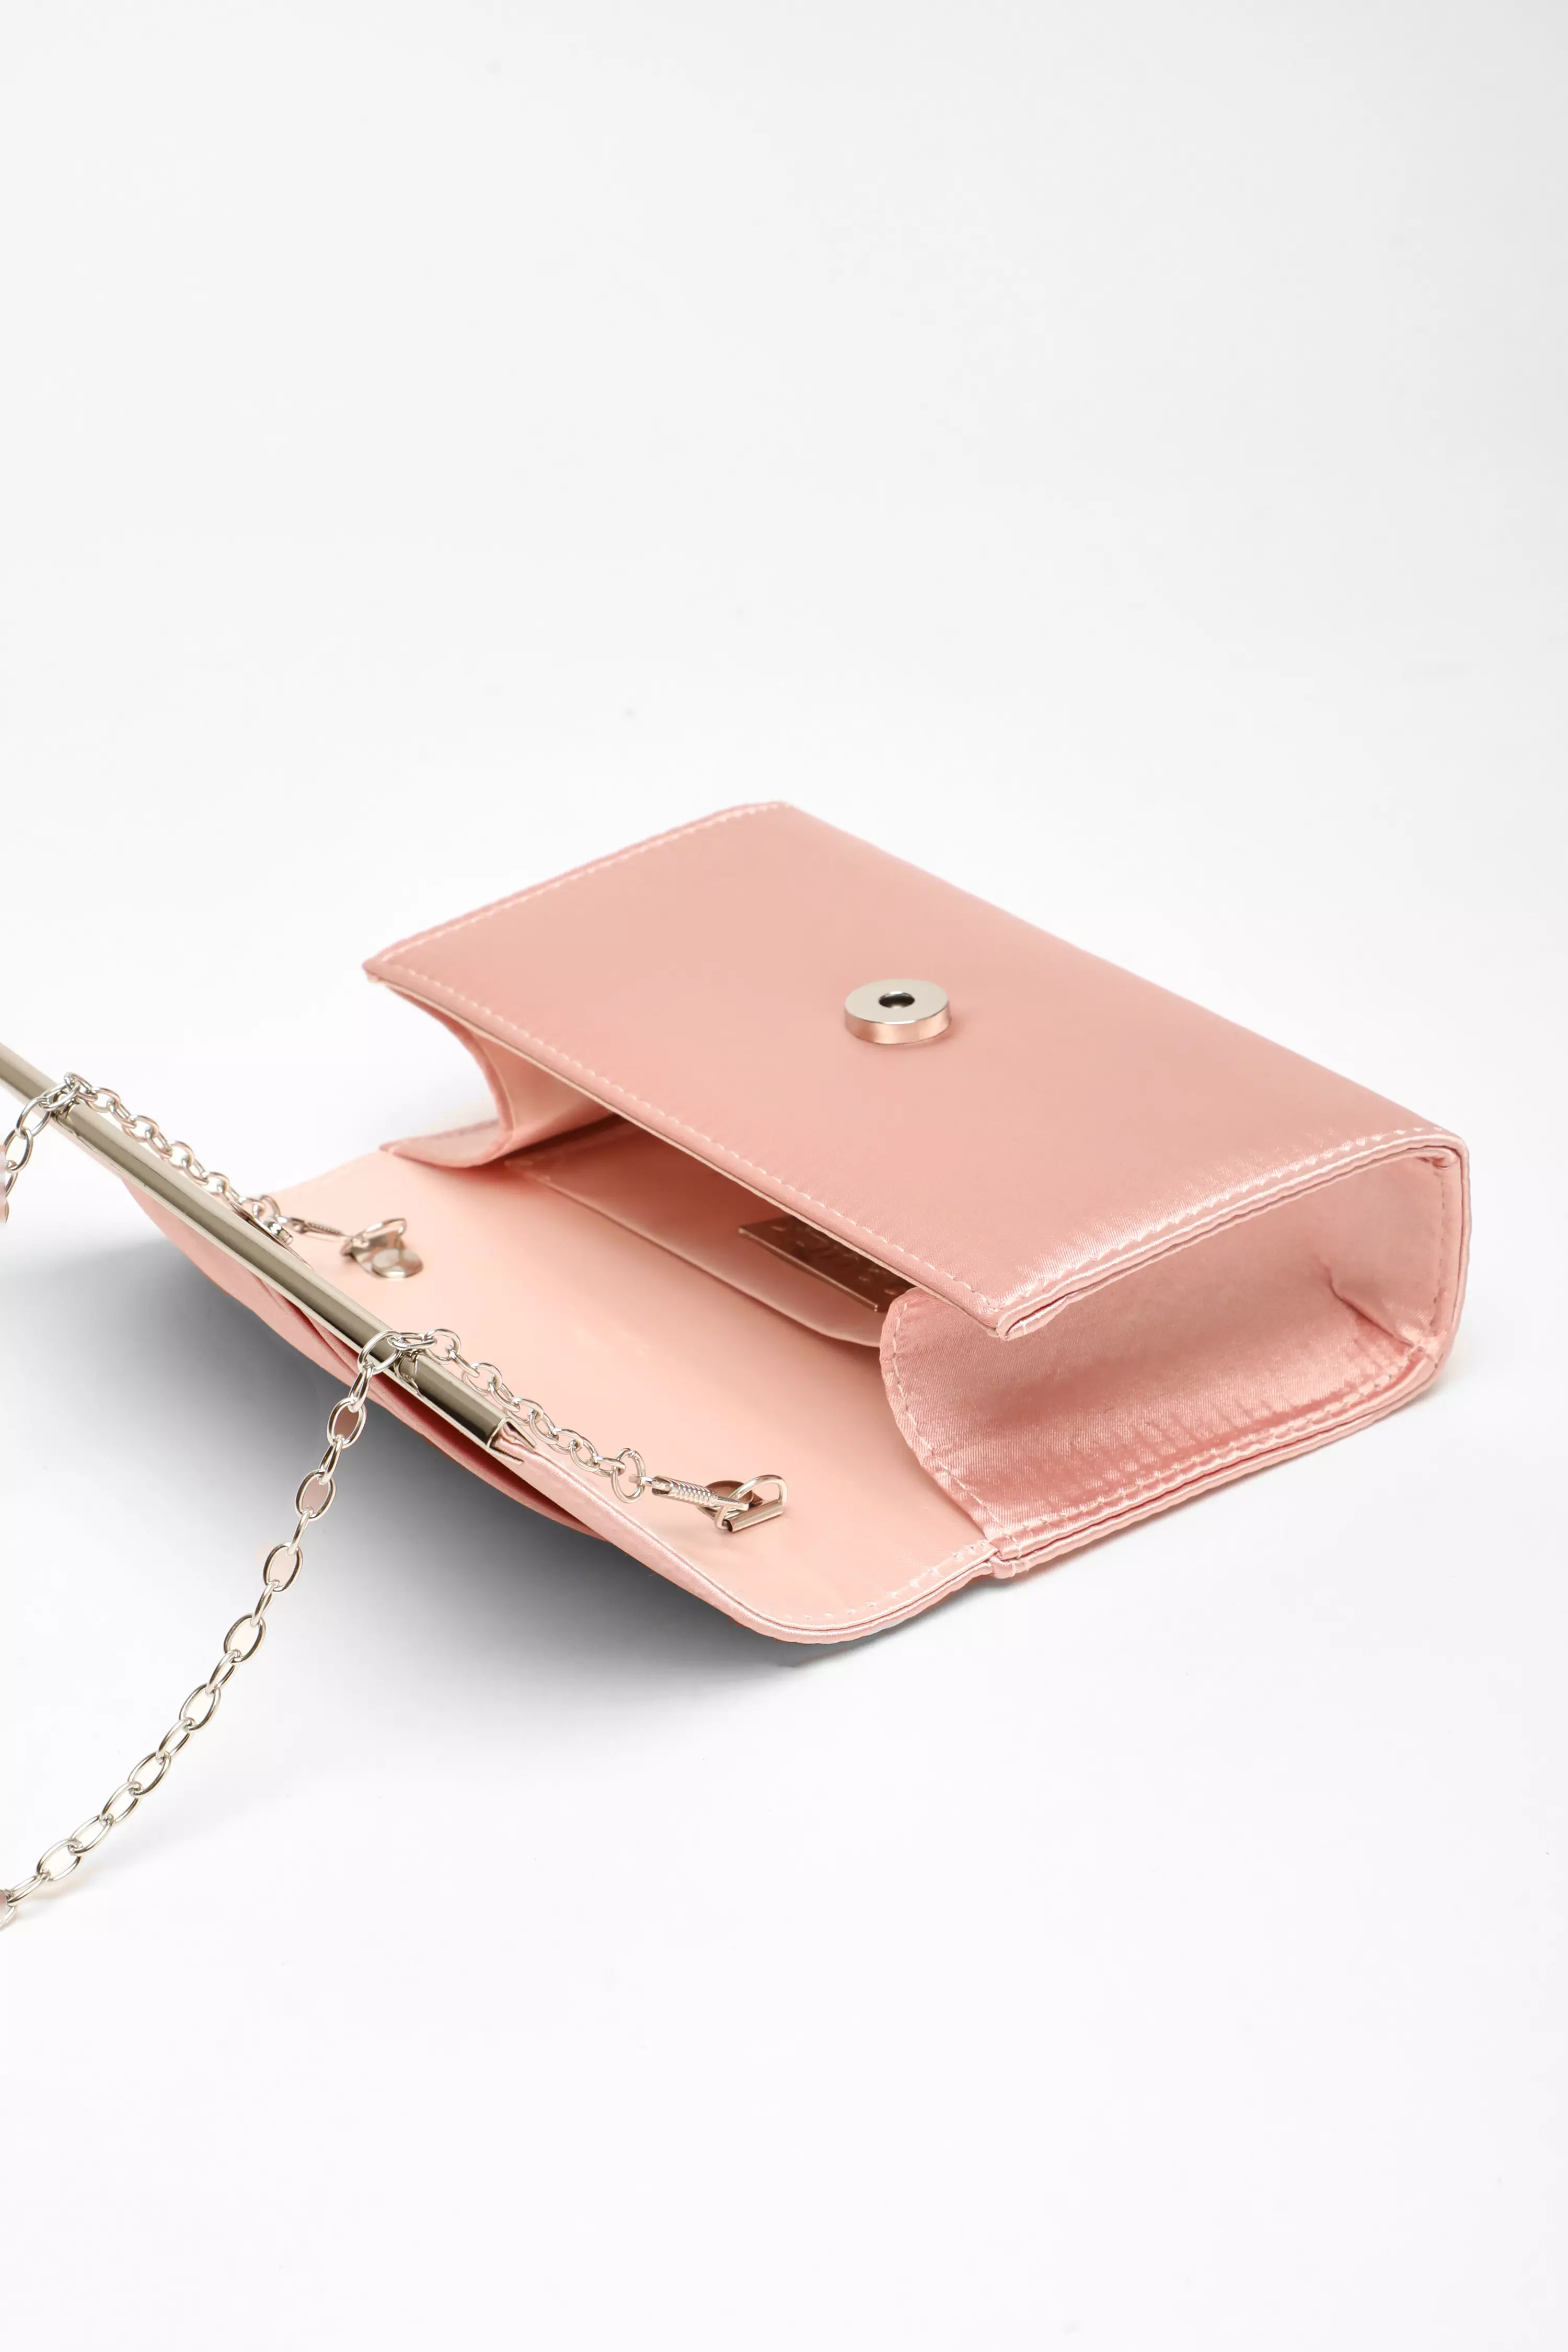 Pale Pink Satin Pleated Clutch Bag